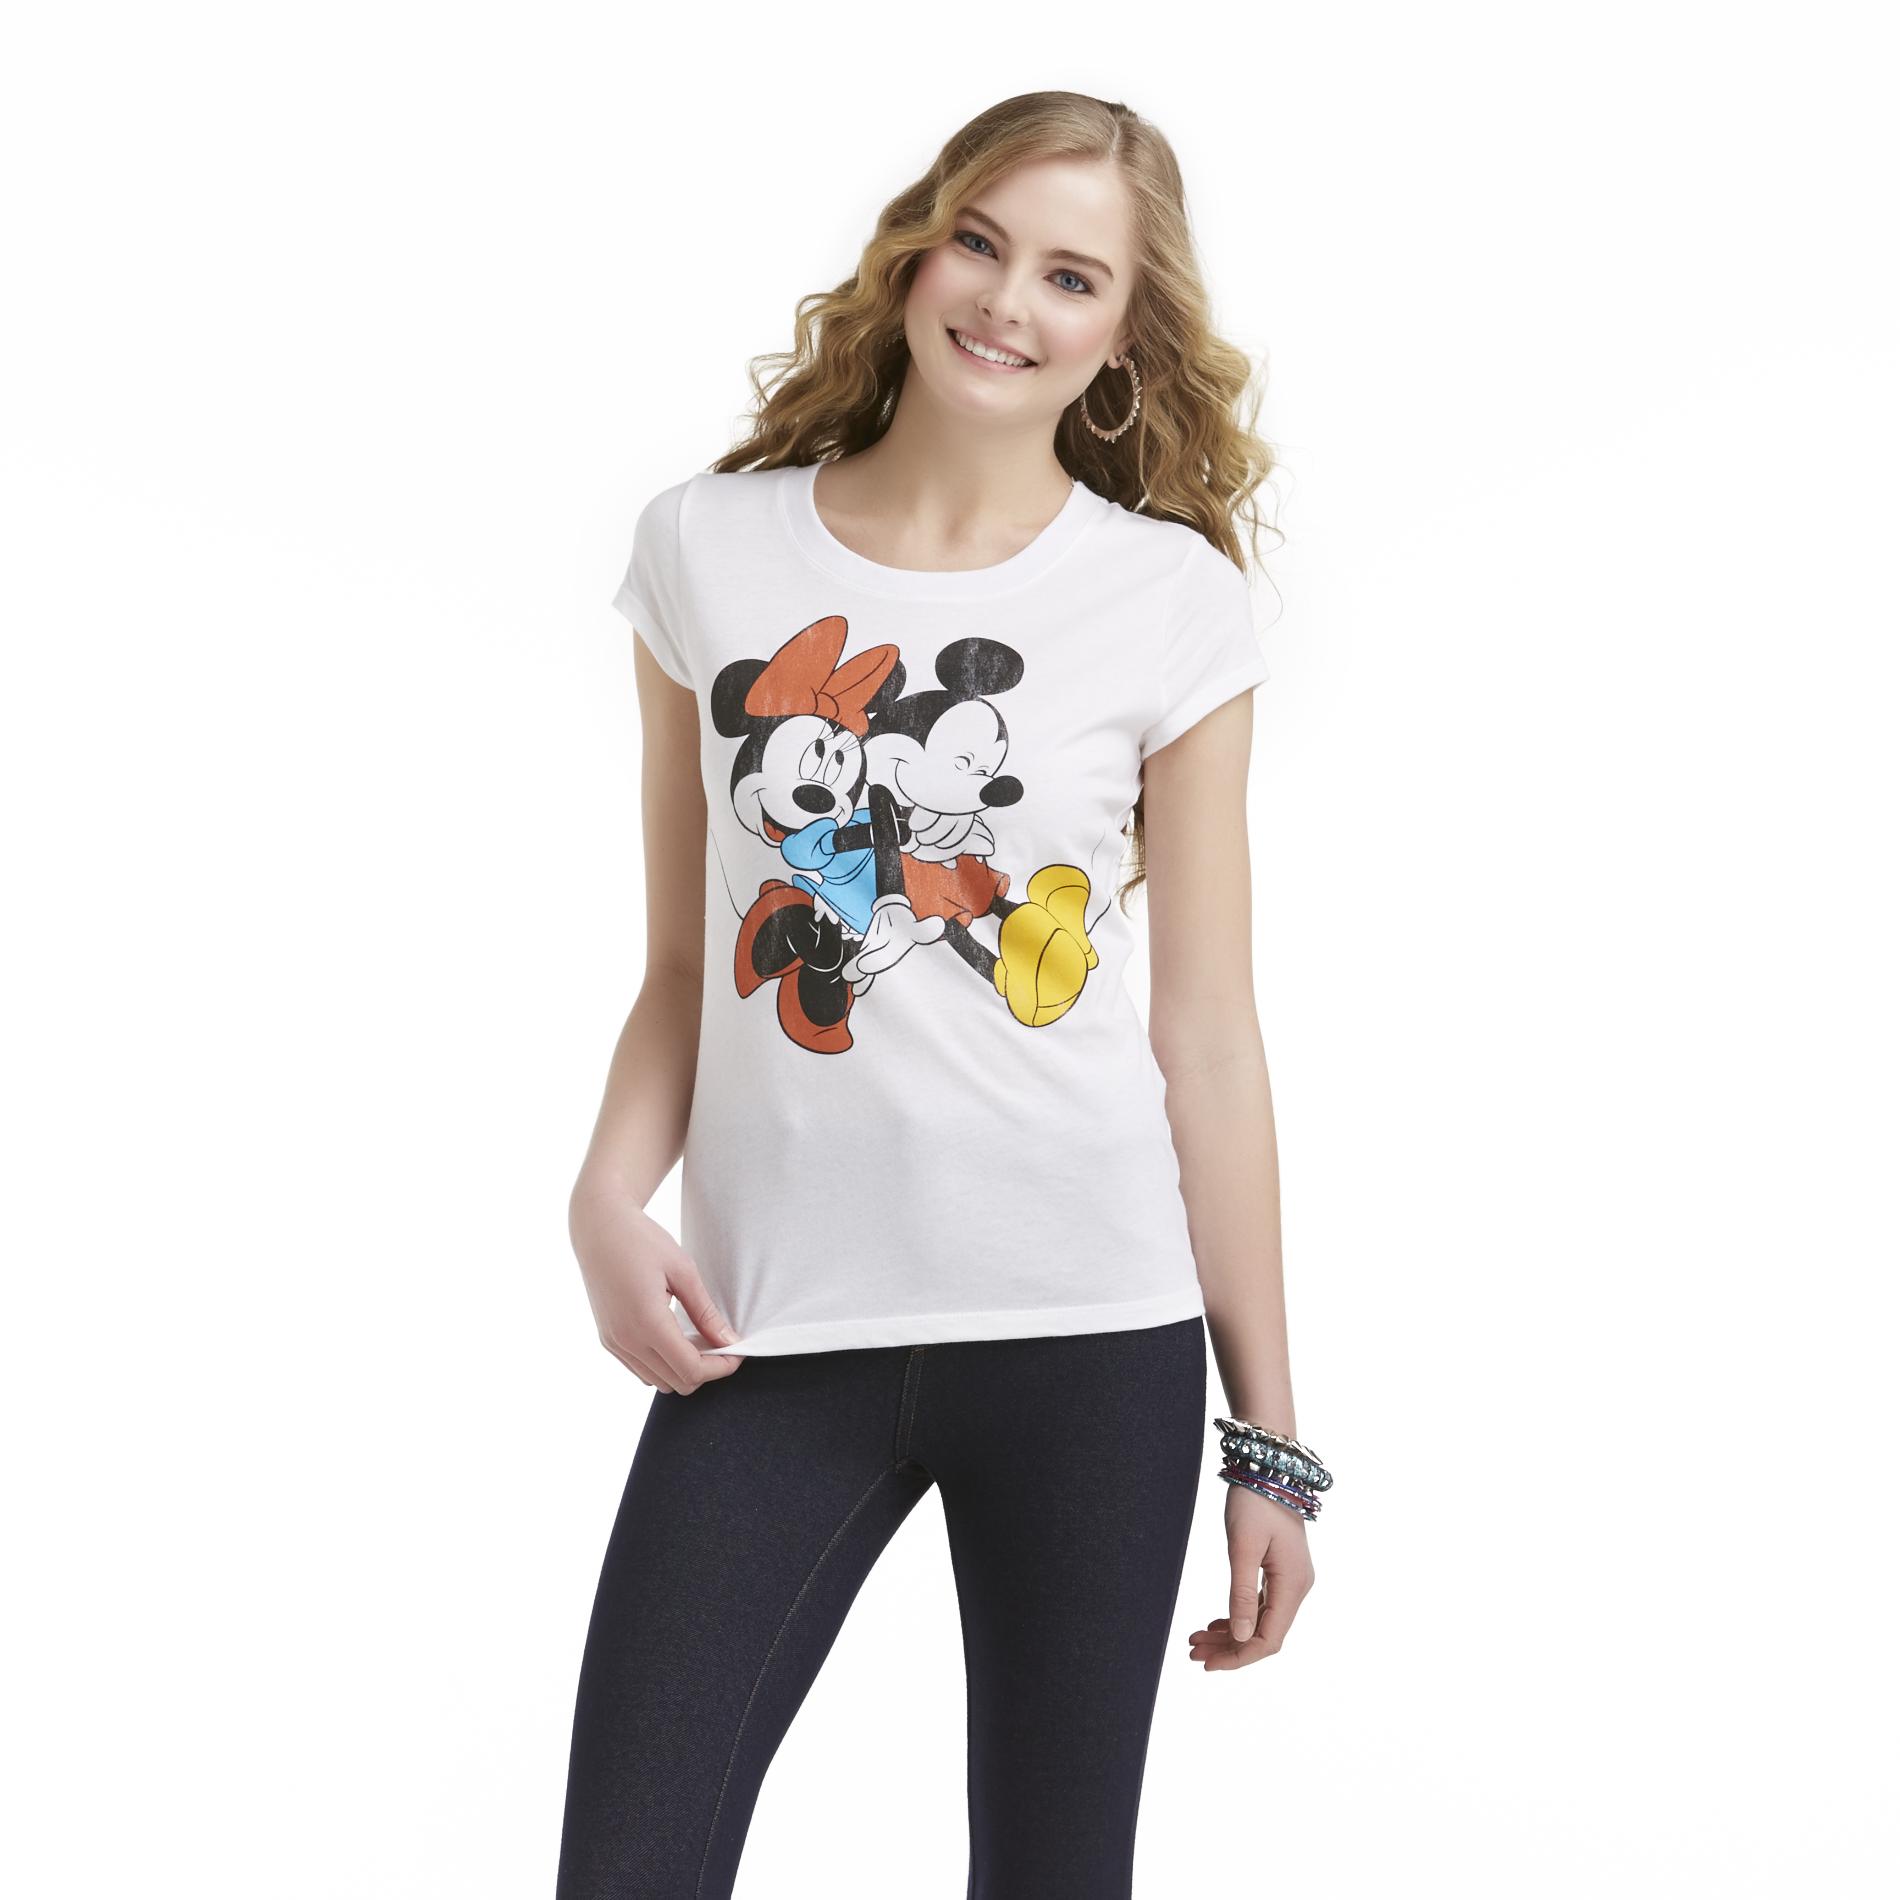 Disney Junior's Graphic T-Shirt - Minnie Mouse & Mickey Mouse